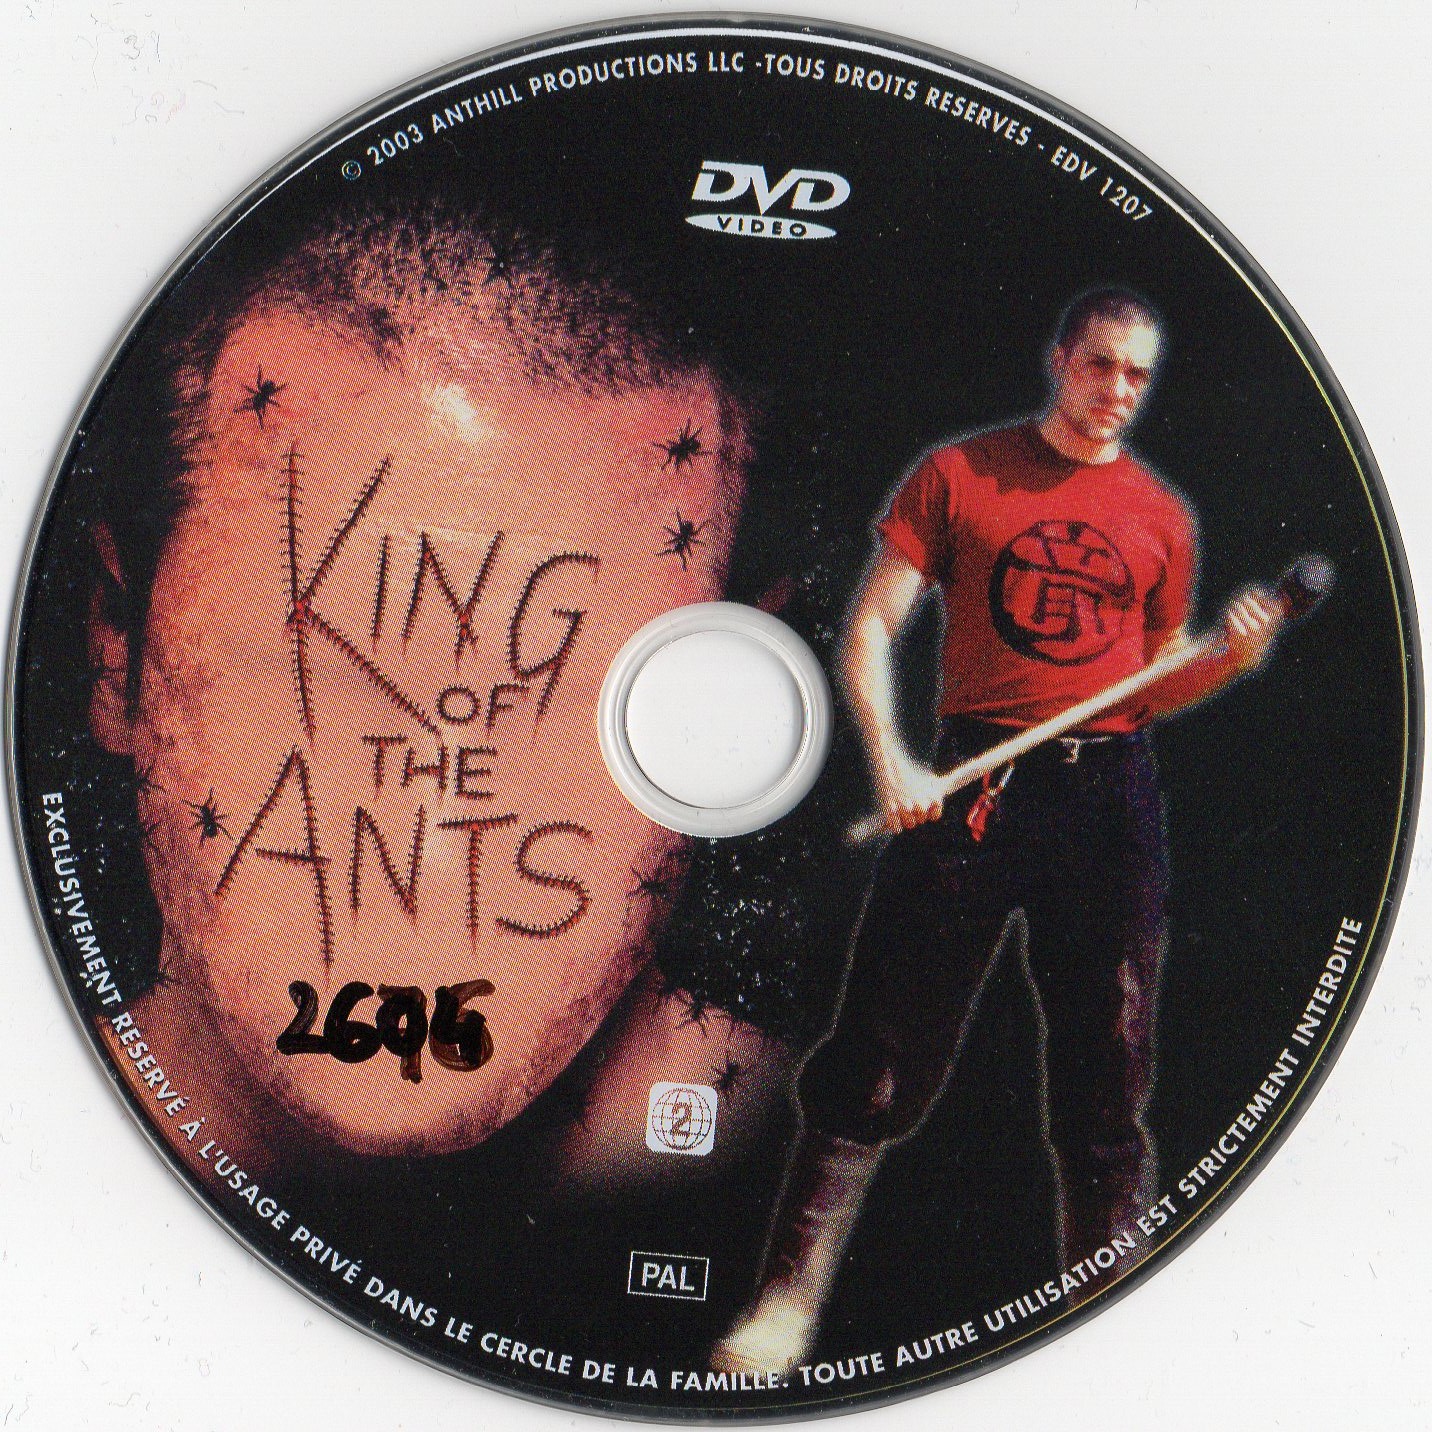 King of the ants